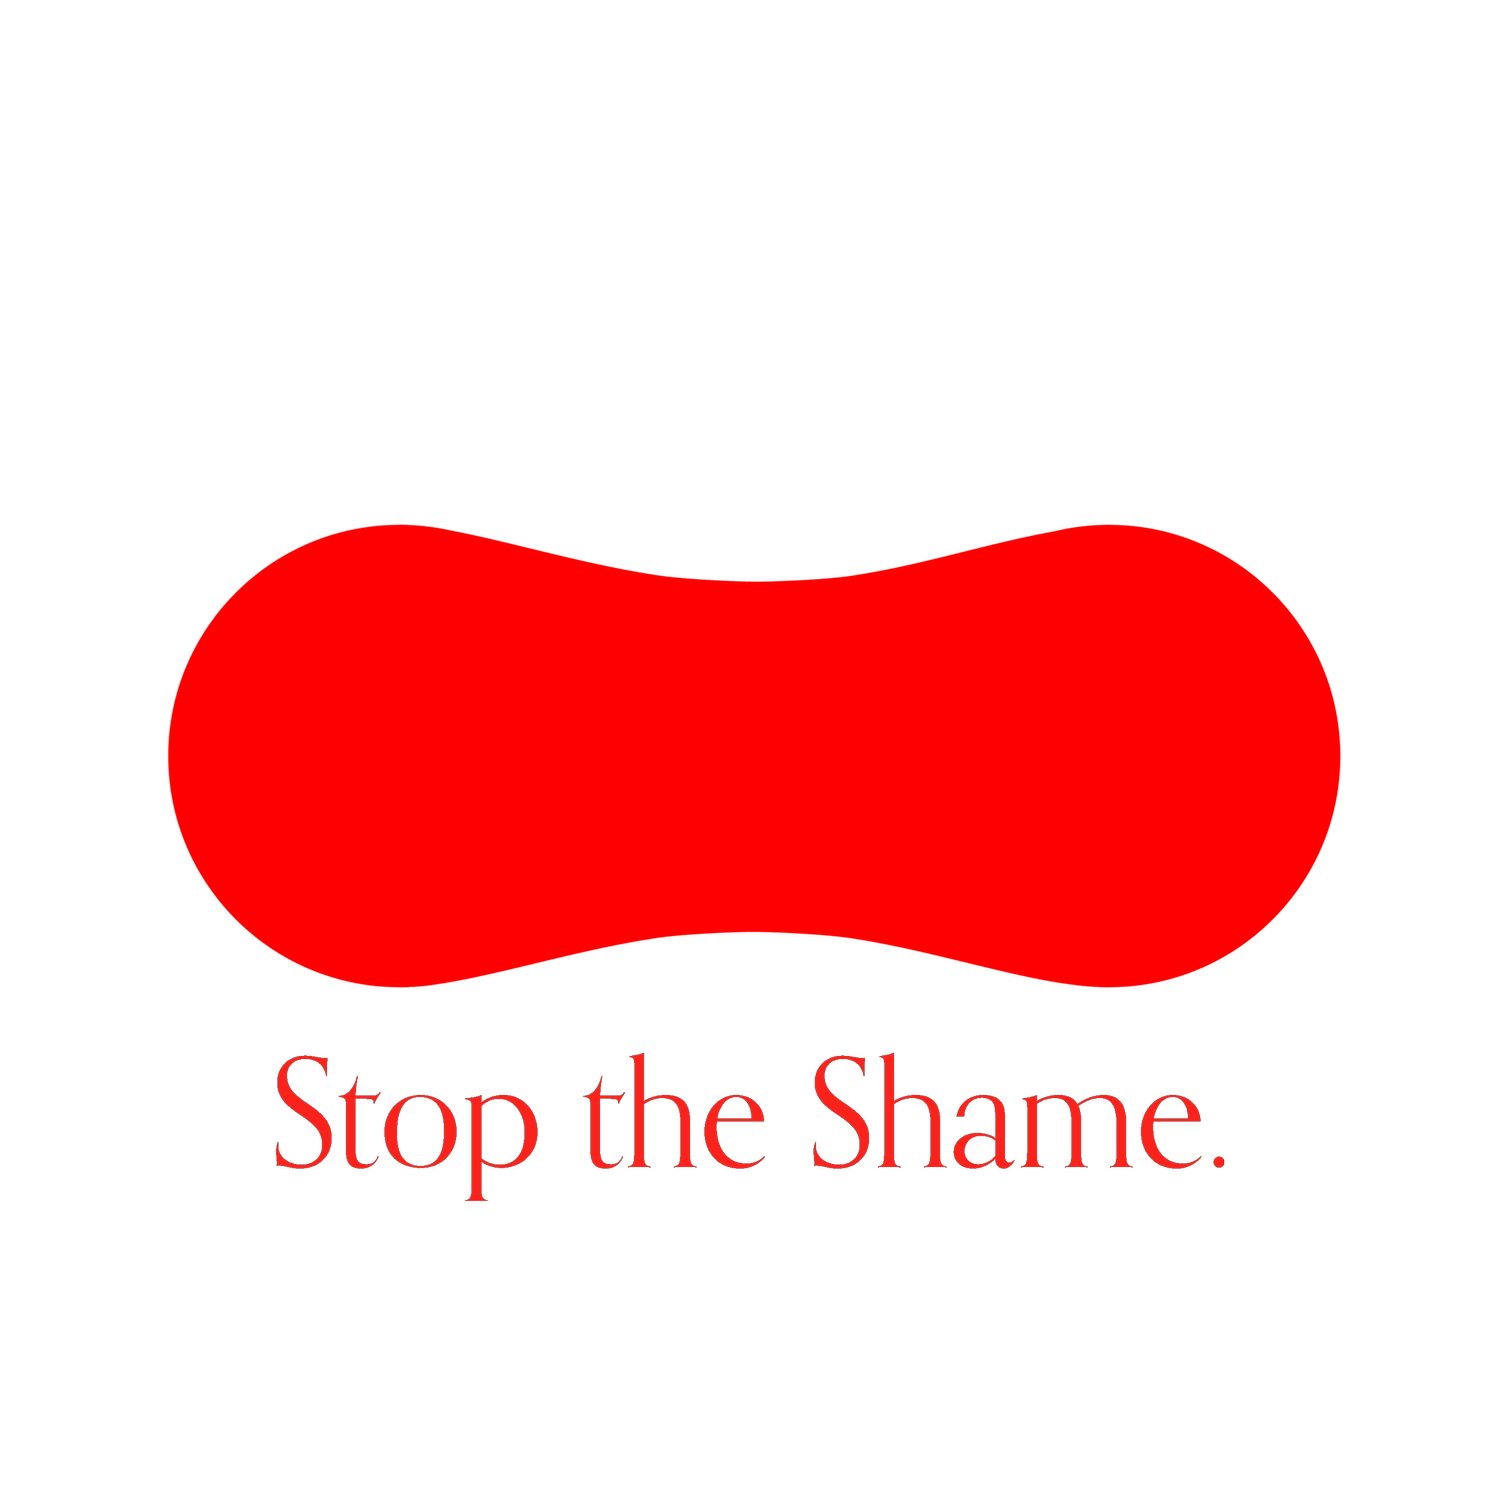 Stop the Shame Period